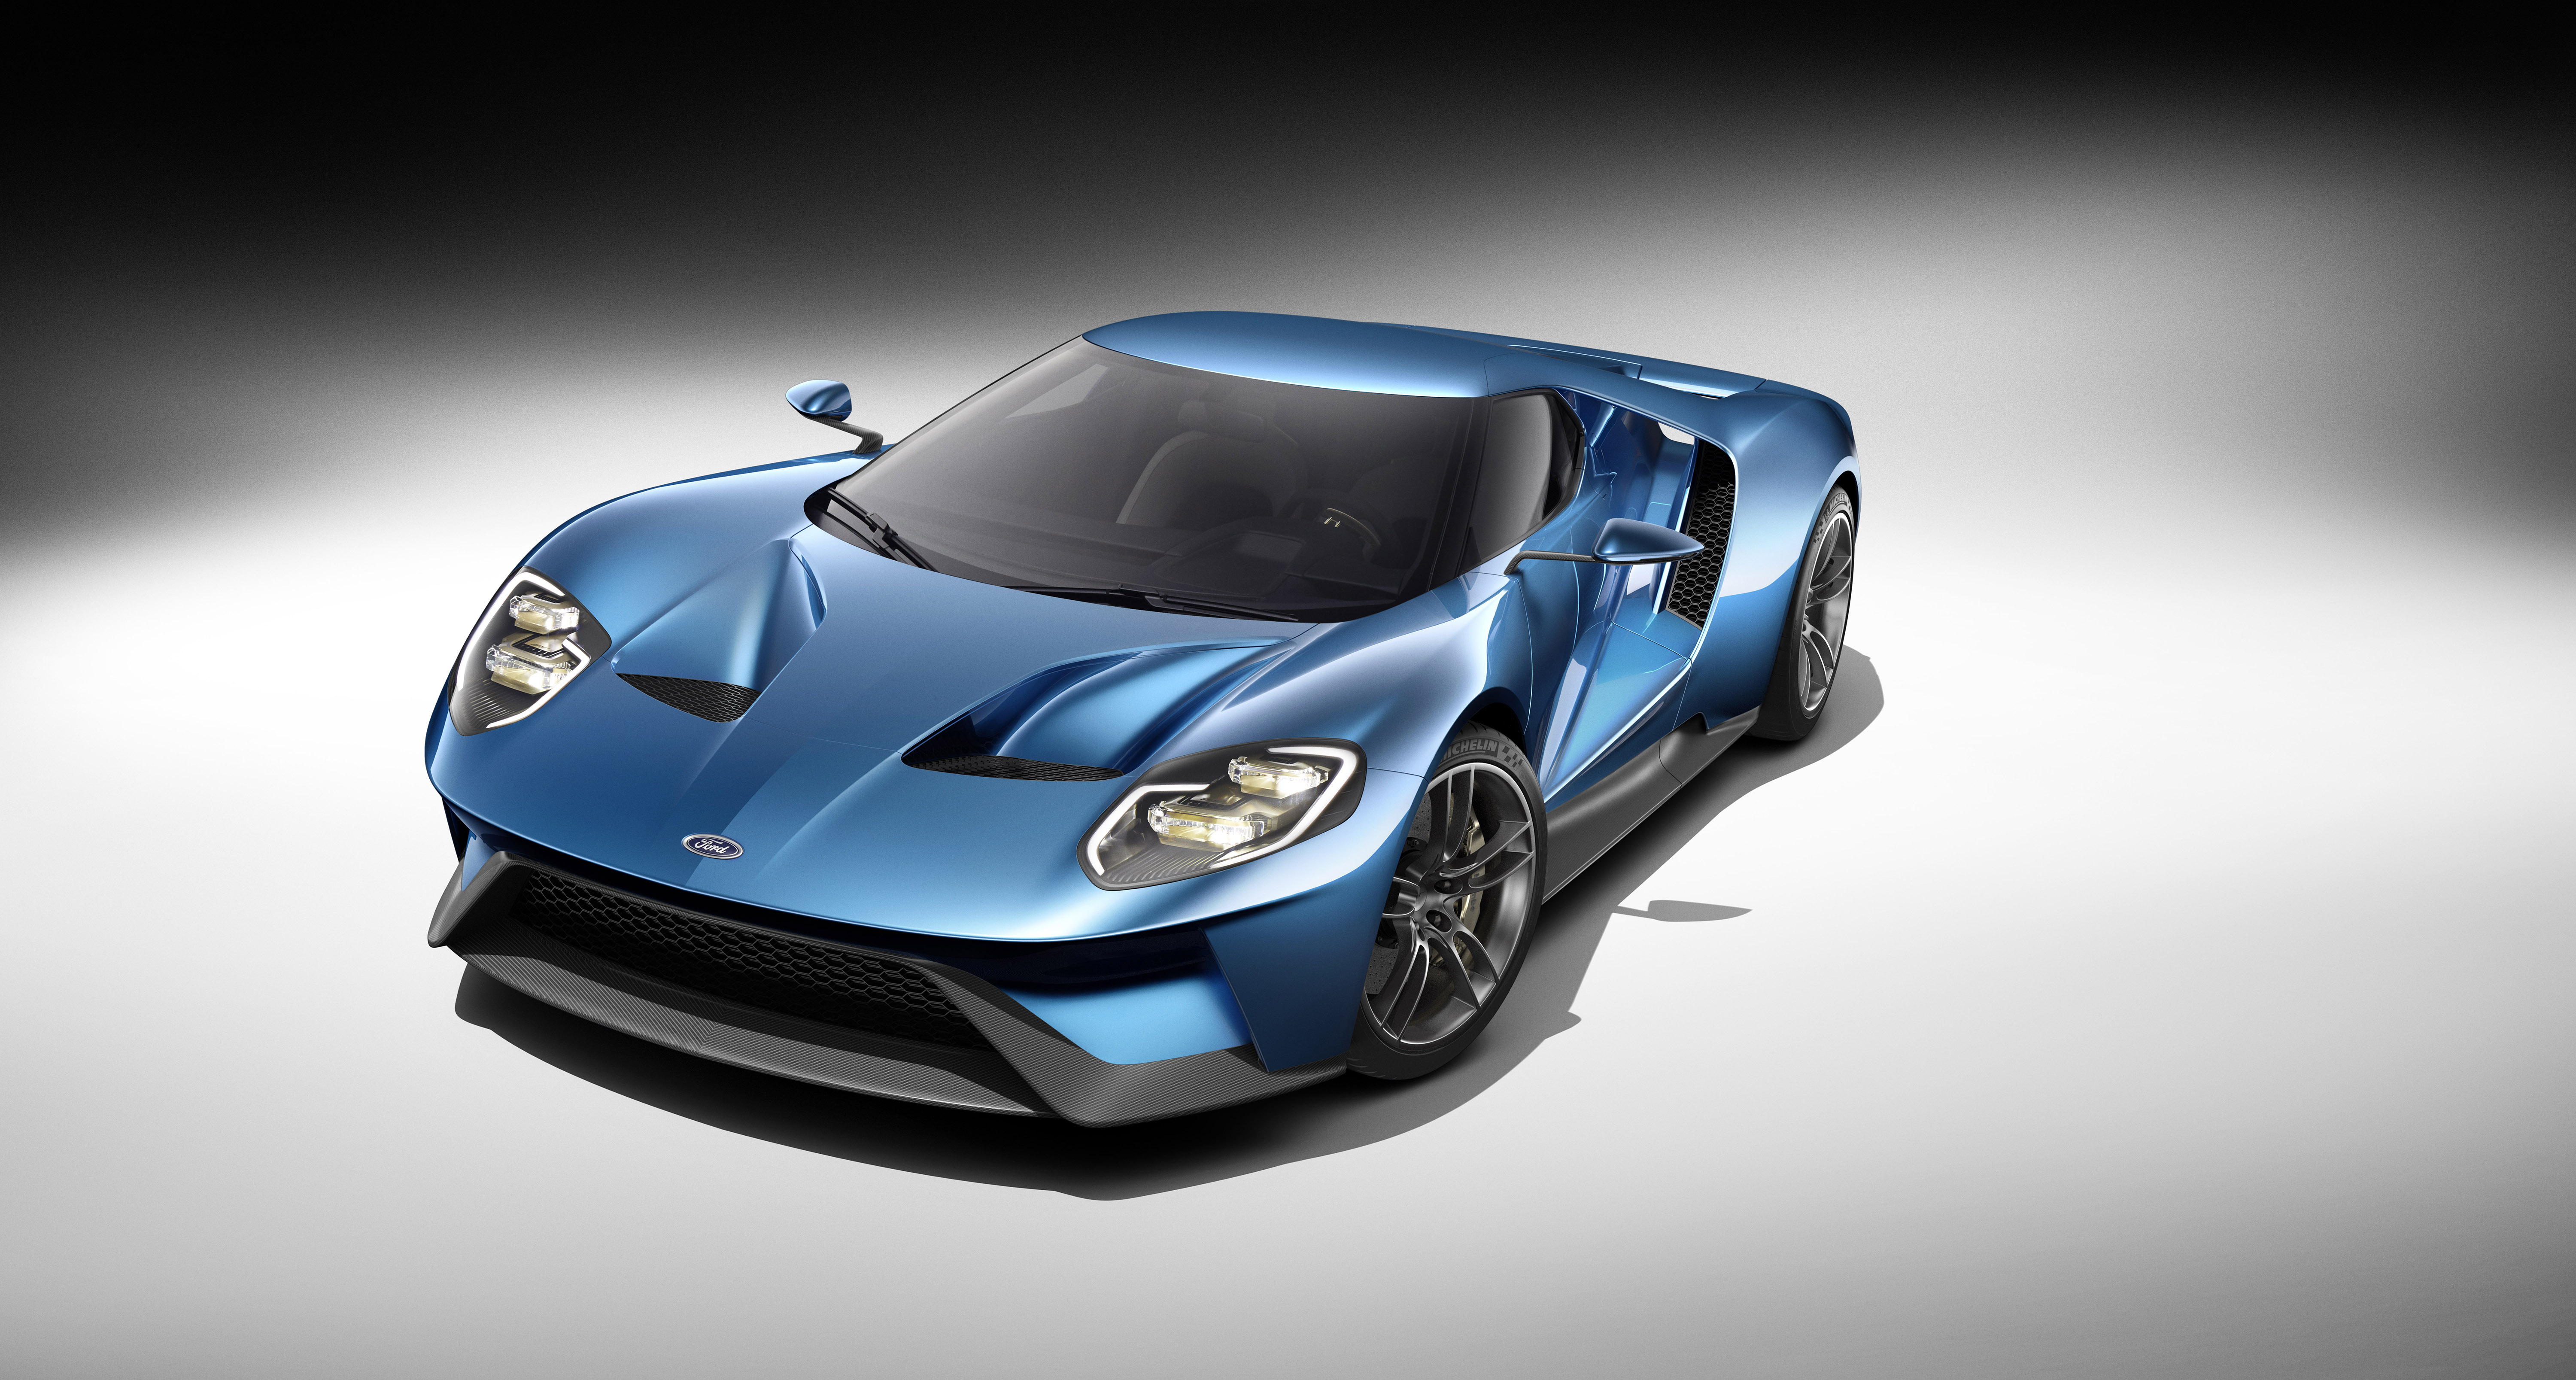 Free download wallpaper Forza Motorsport 6, Video Game, Forza on your PC desktop